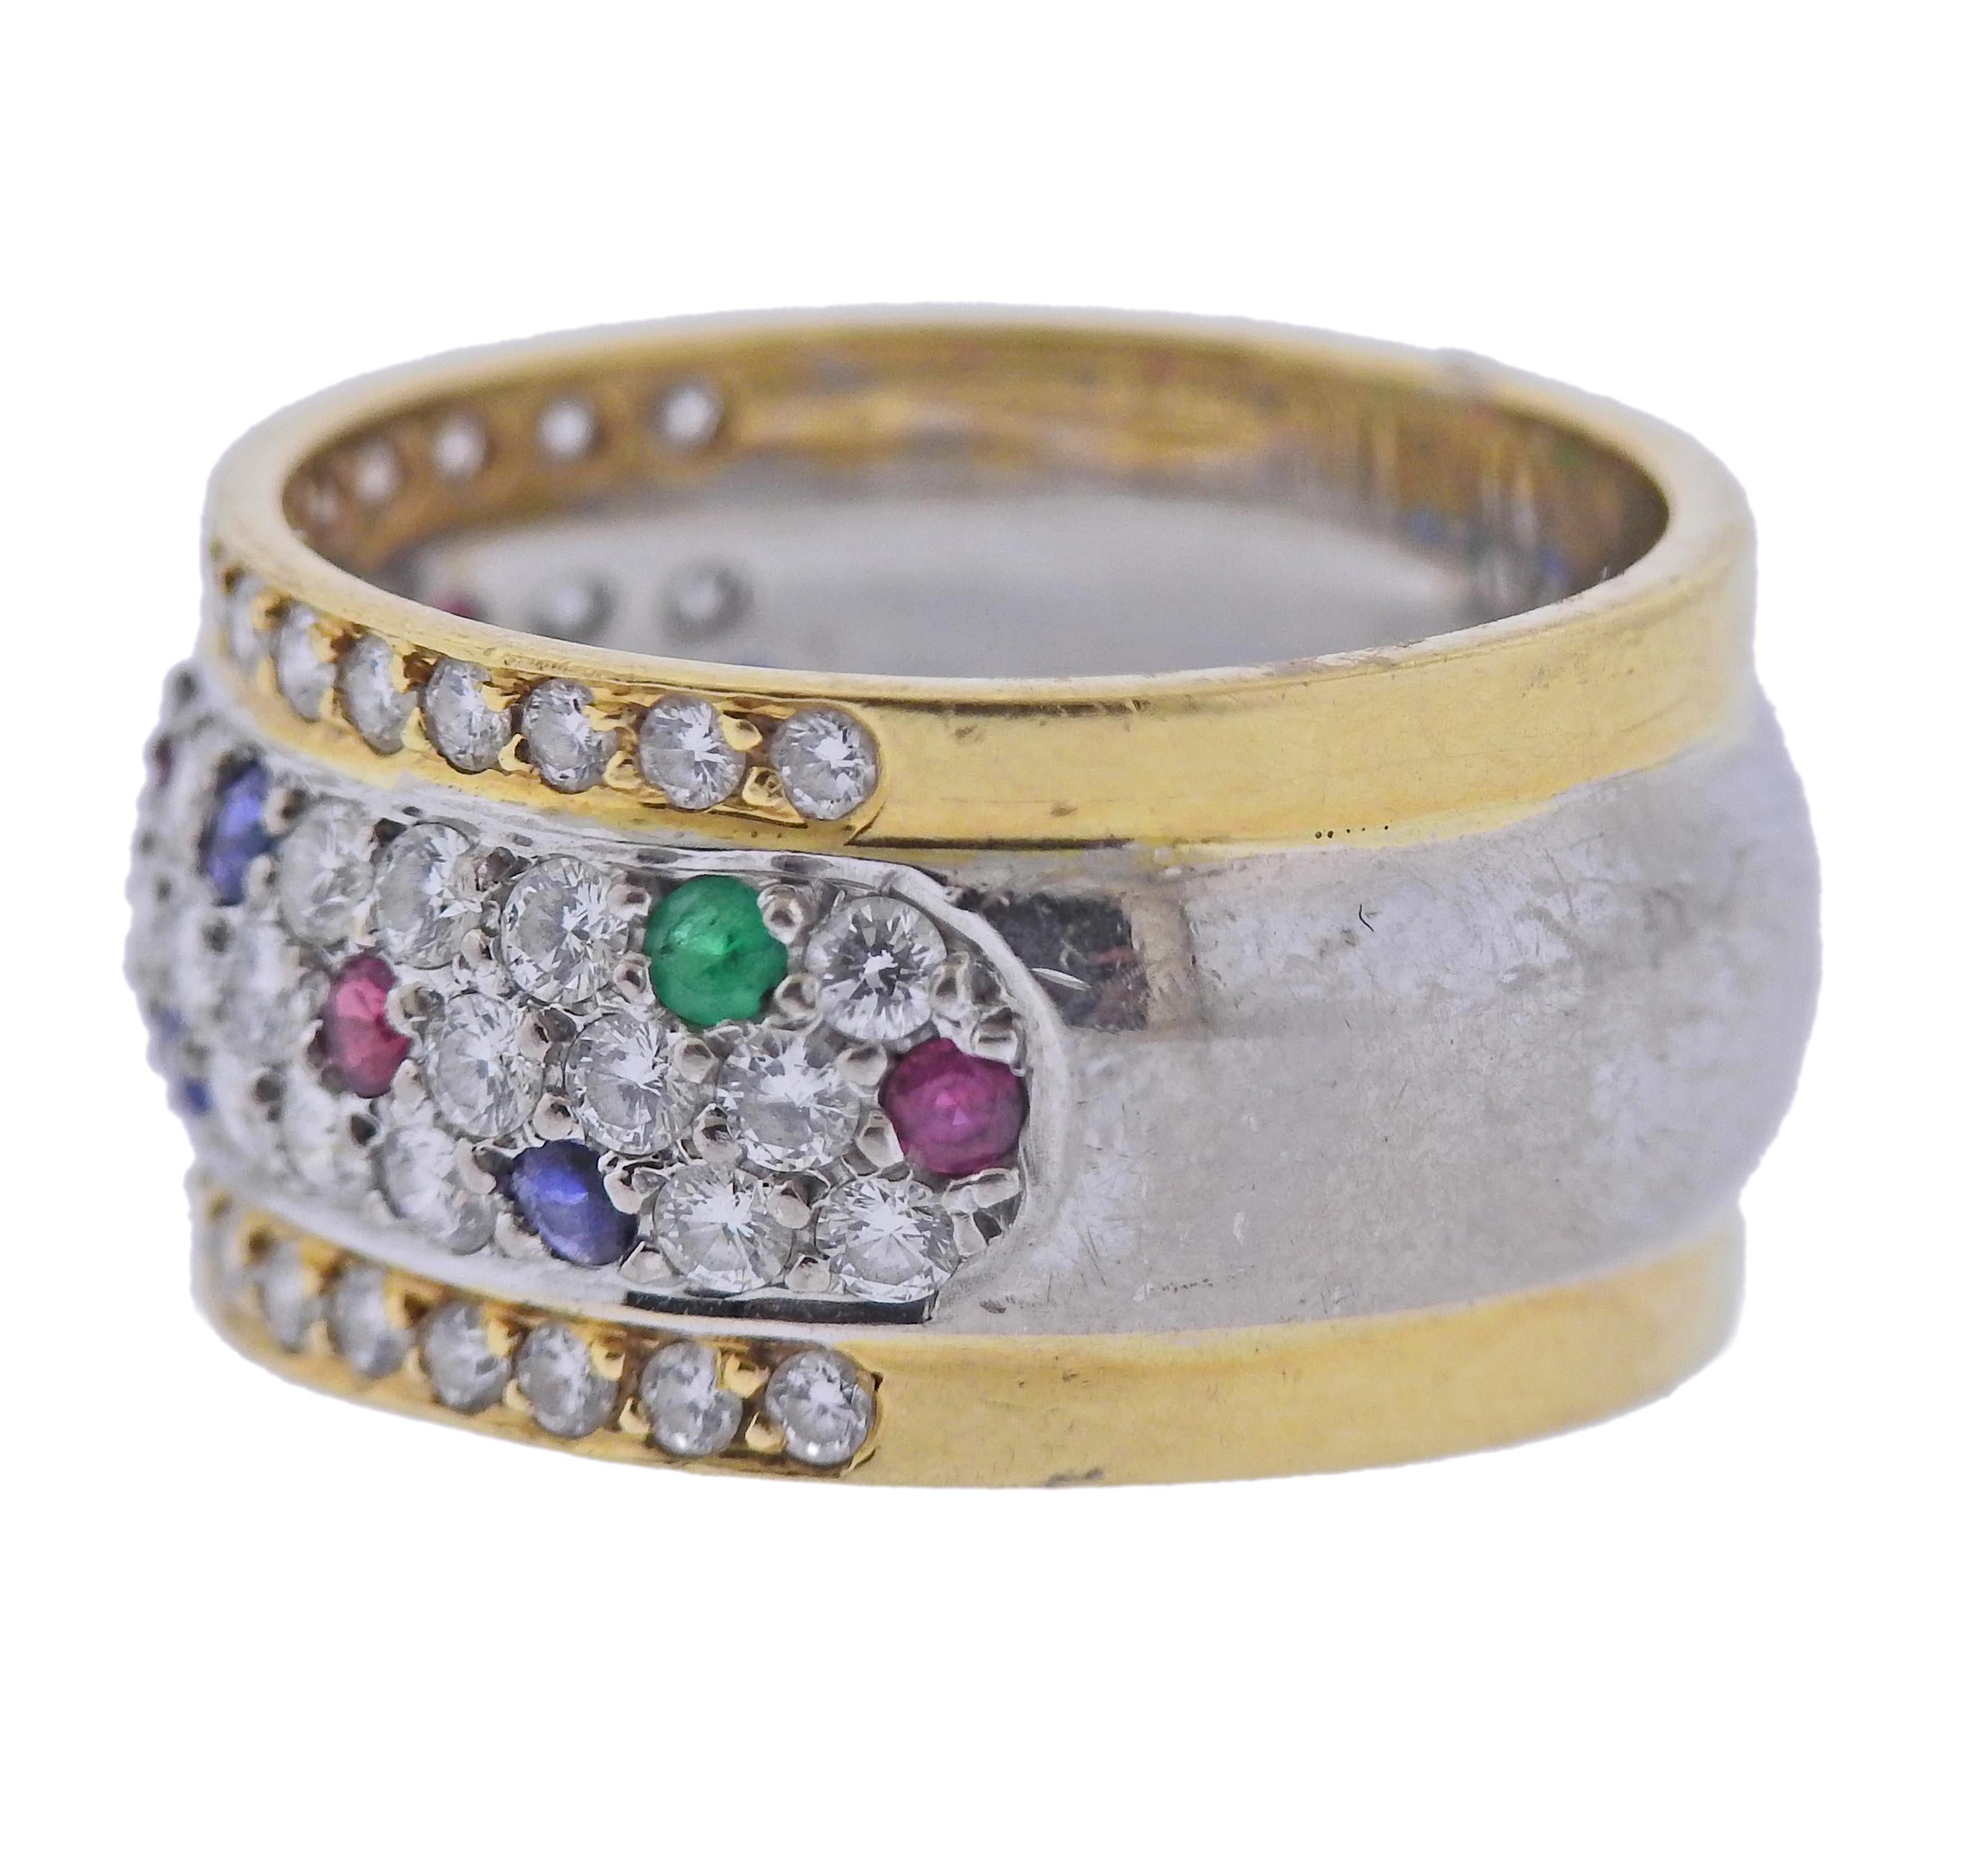 18k gold ring with Diamonds 1.44ctw, Ruby 0.13ctw,  Sapphire 0.18ctw, Emerald 0.11ctw. Ring size 9.25 (EU 60) and is 12mm wide. Marked: 50, D1.44, Em011, R013, S018 Weight - 11.4 grams.